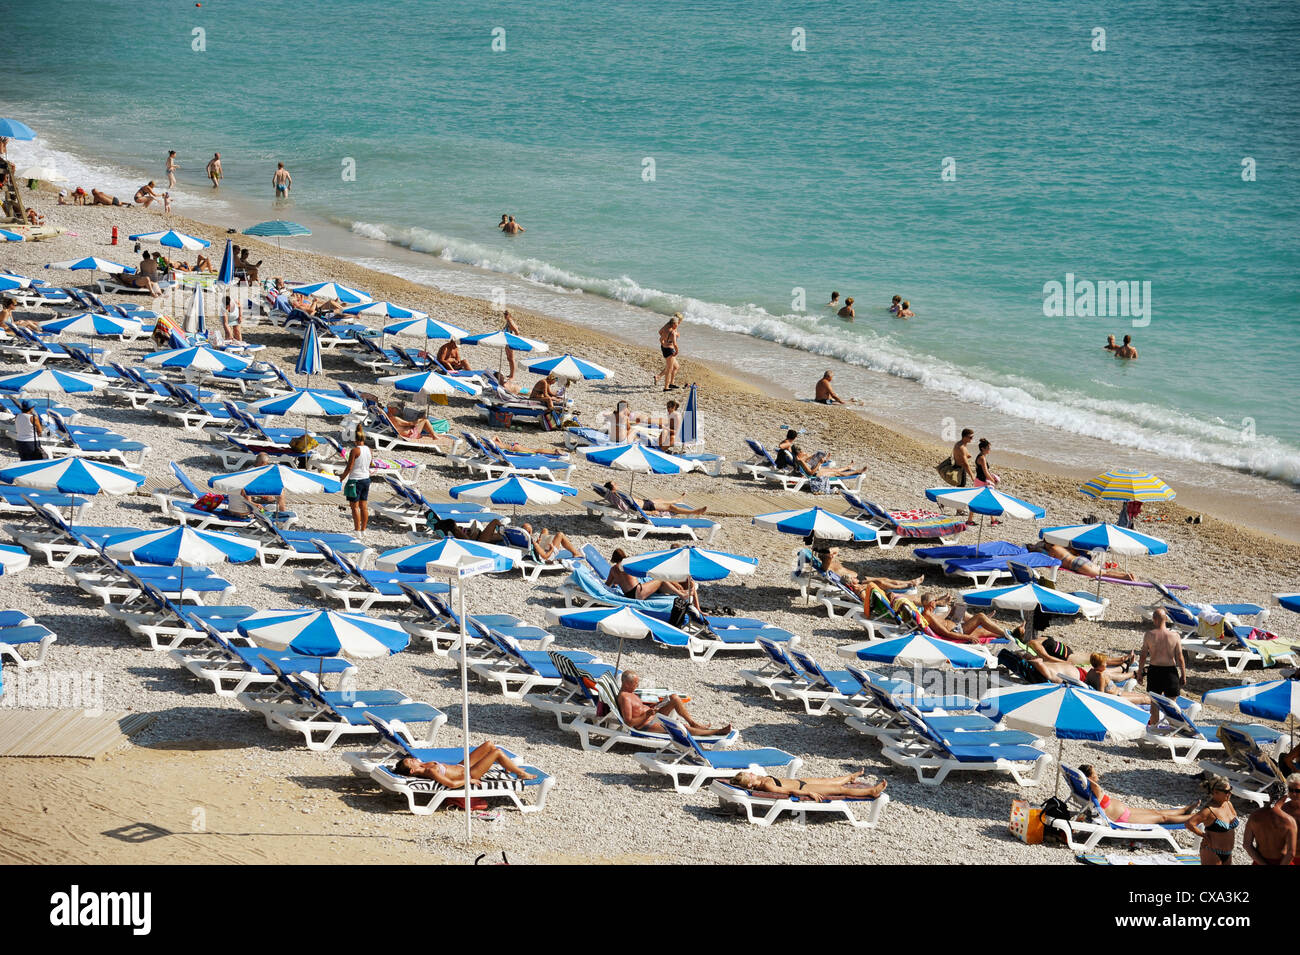 vacationers take in the summer sun on the beach of Albir,Costa Blanca, Spain Stock Photo